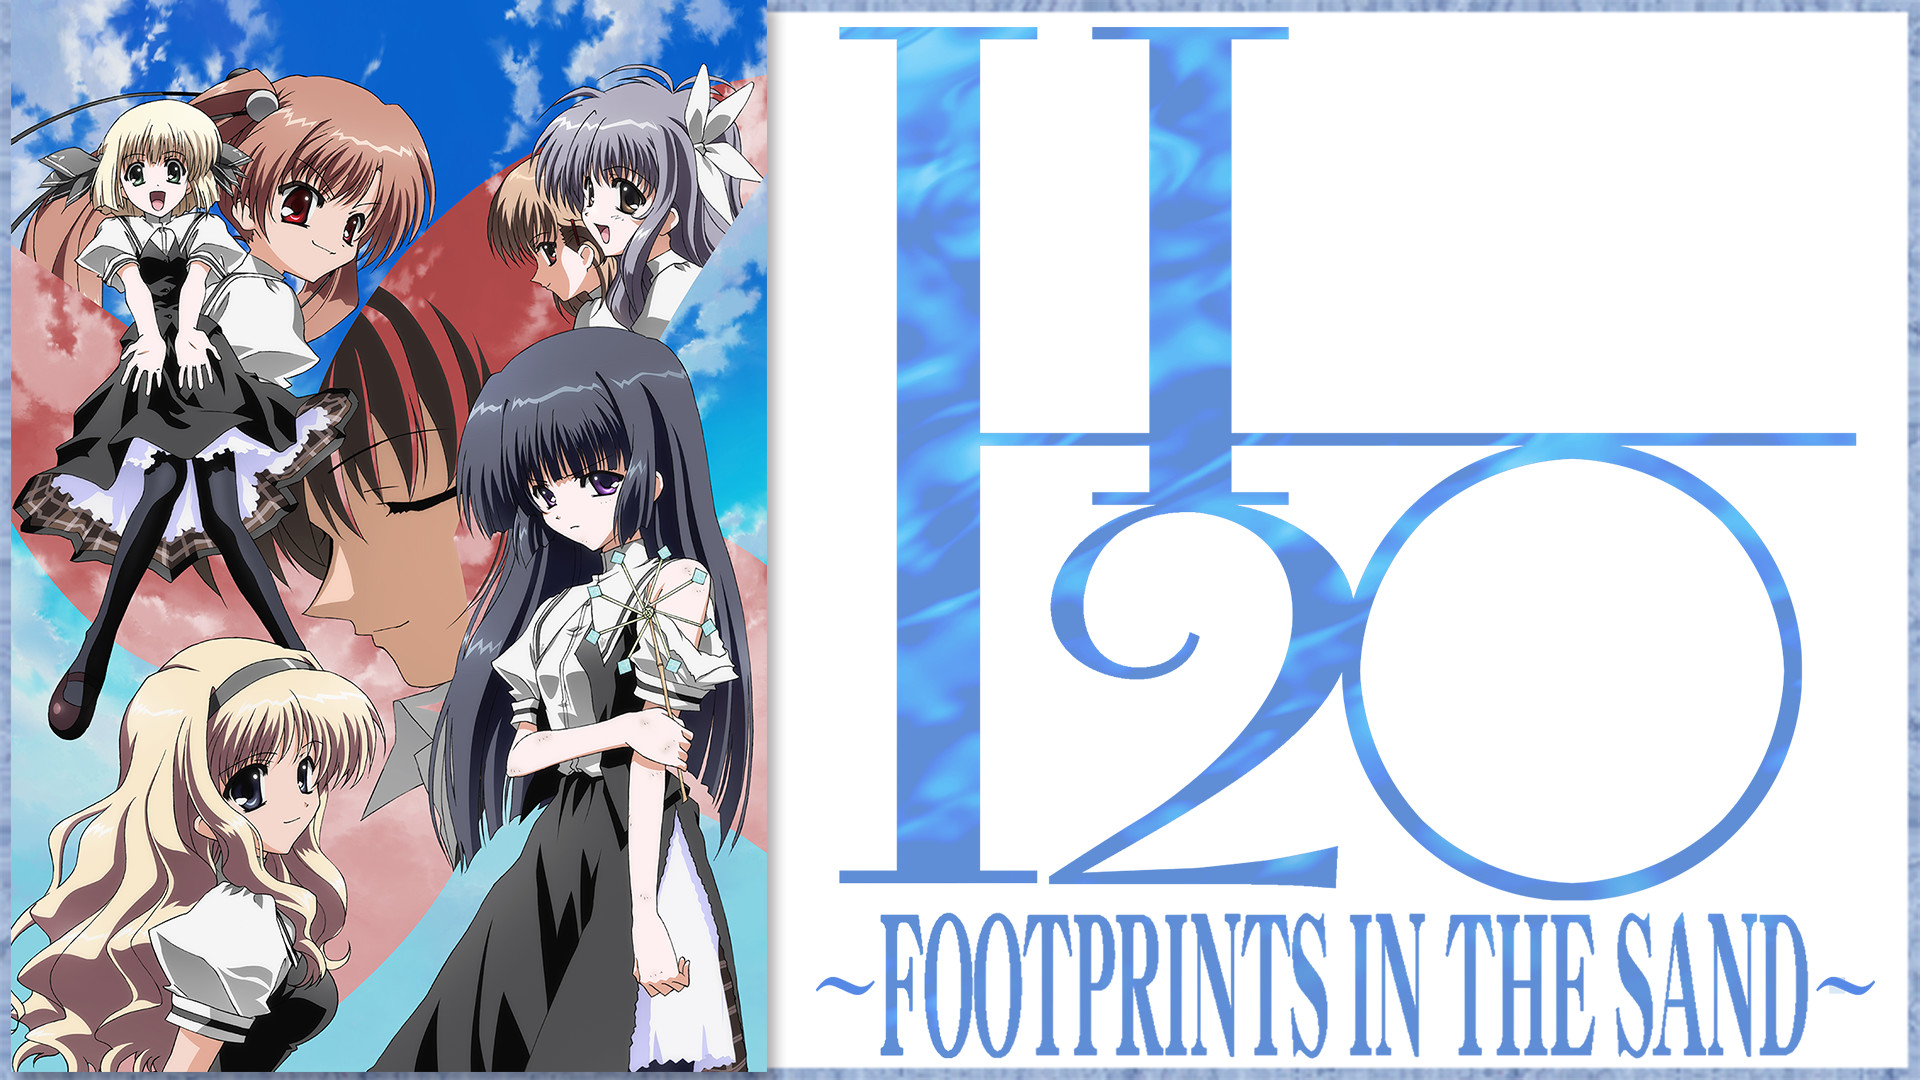 H2o Footprints In The Sand アニメ動画見放題 Dアニメストア